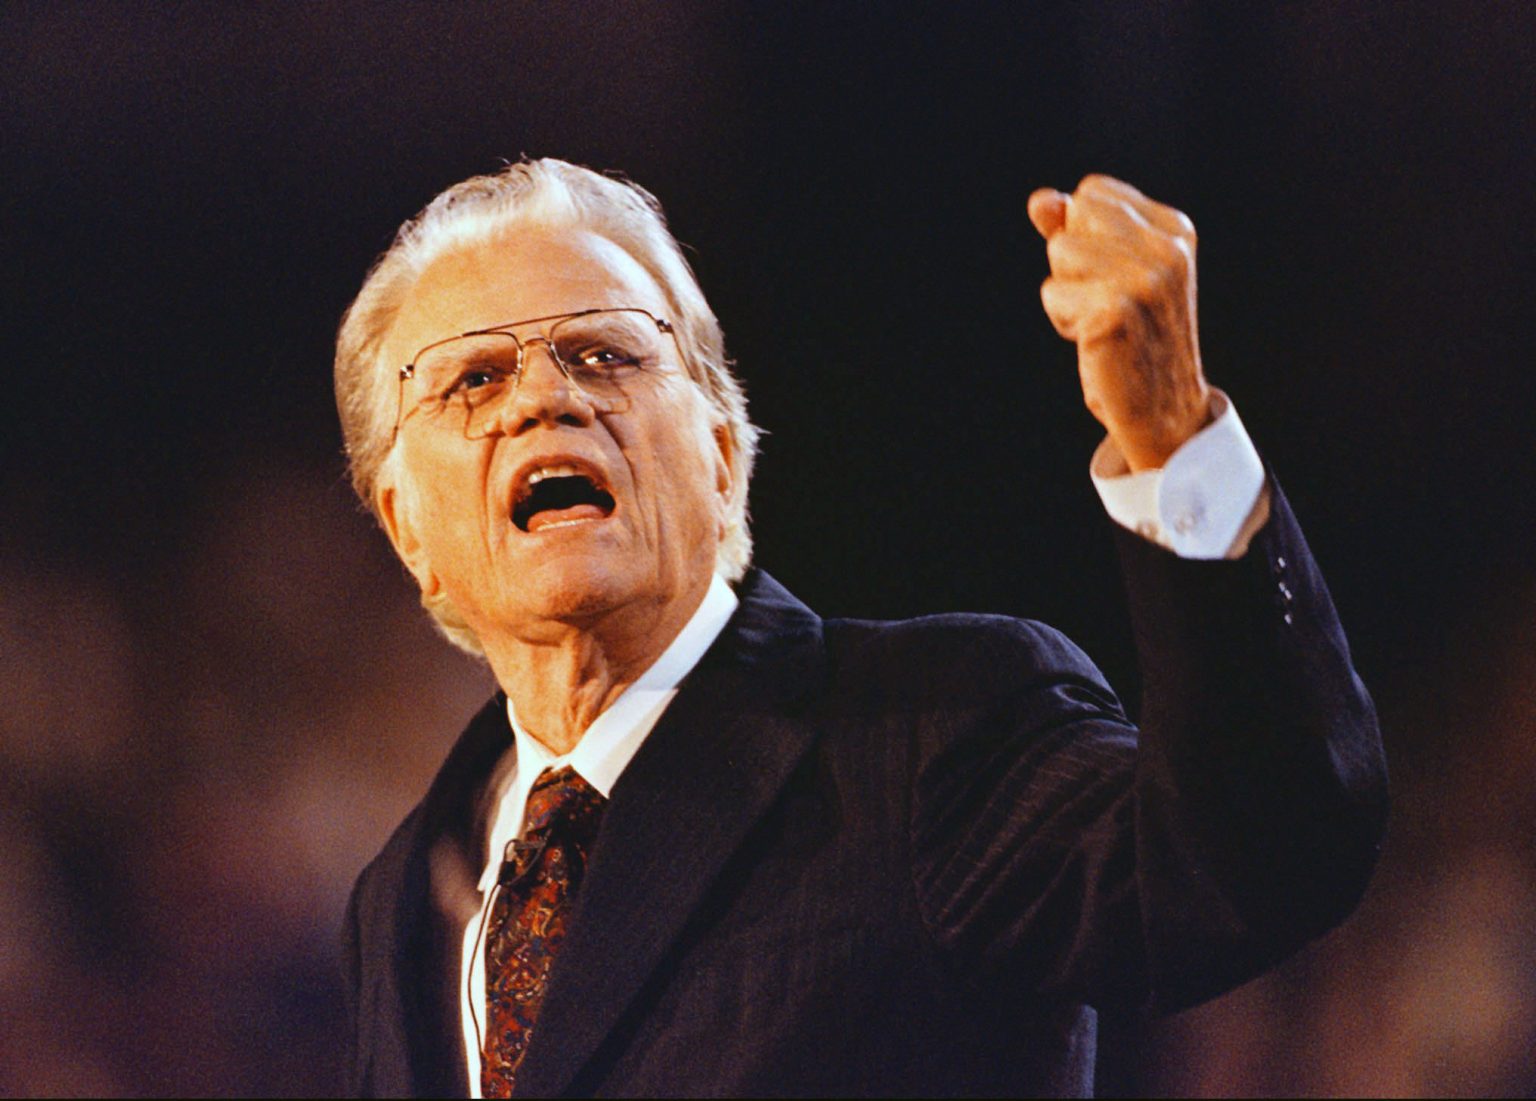 DOWNLOAD MP3: The Power of a Positive No by Evangelist BILLY GRAHAM (Sermon) 17